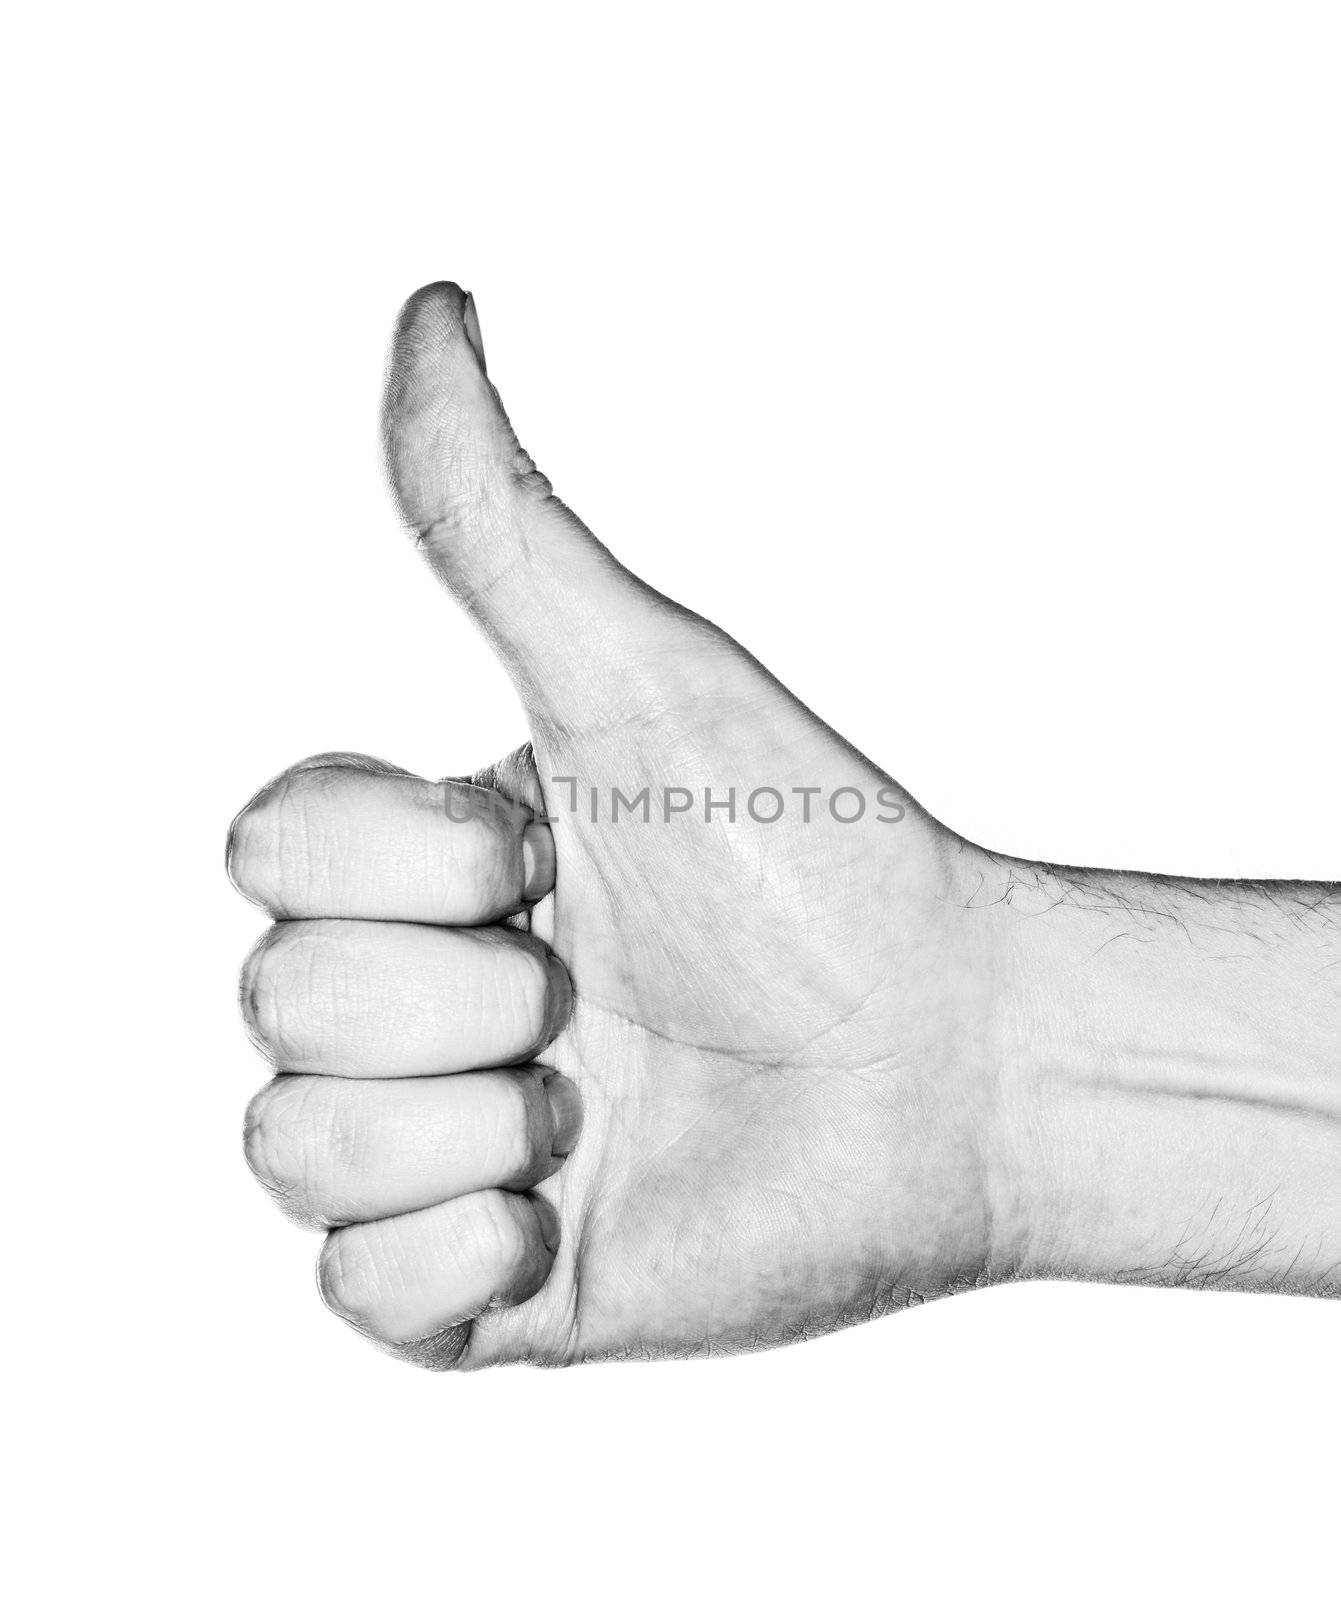 Thumb Up by Stocksnapper